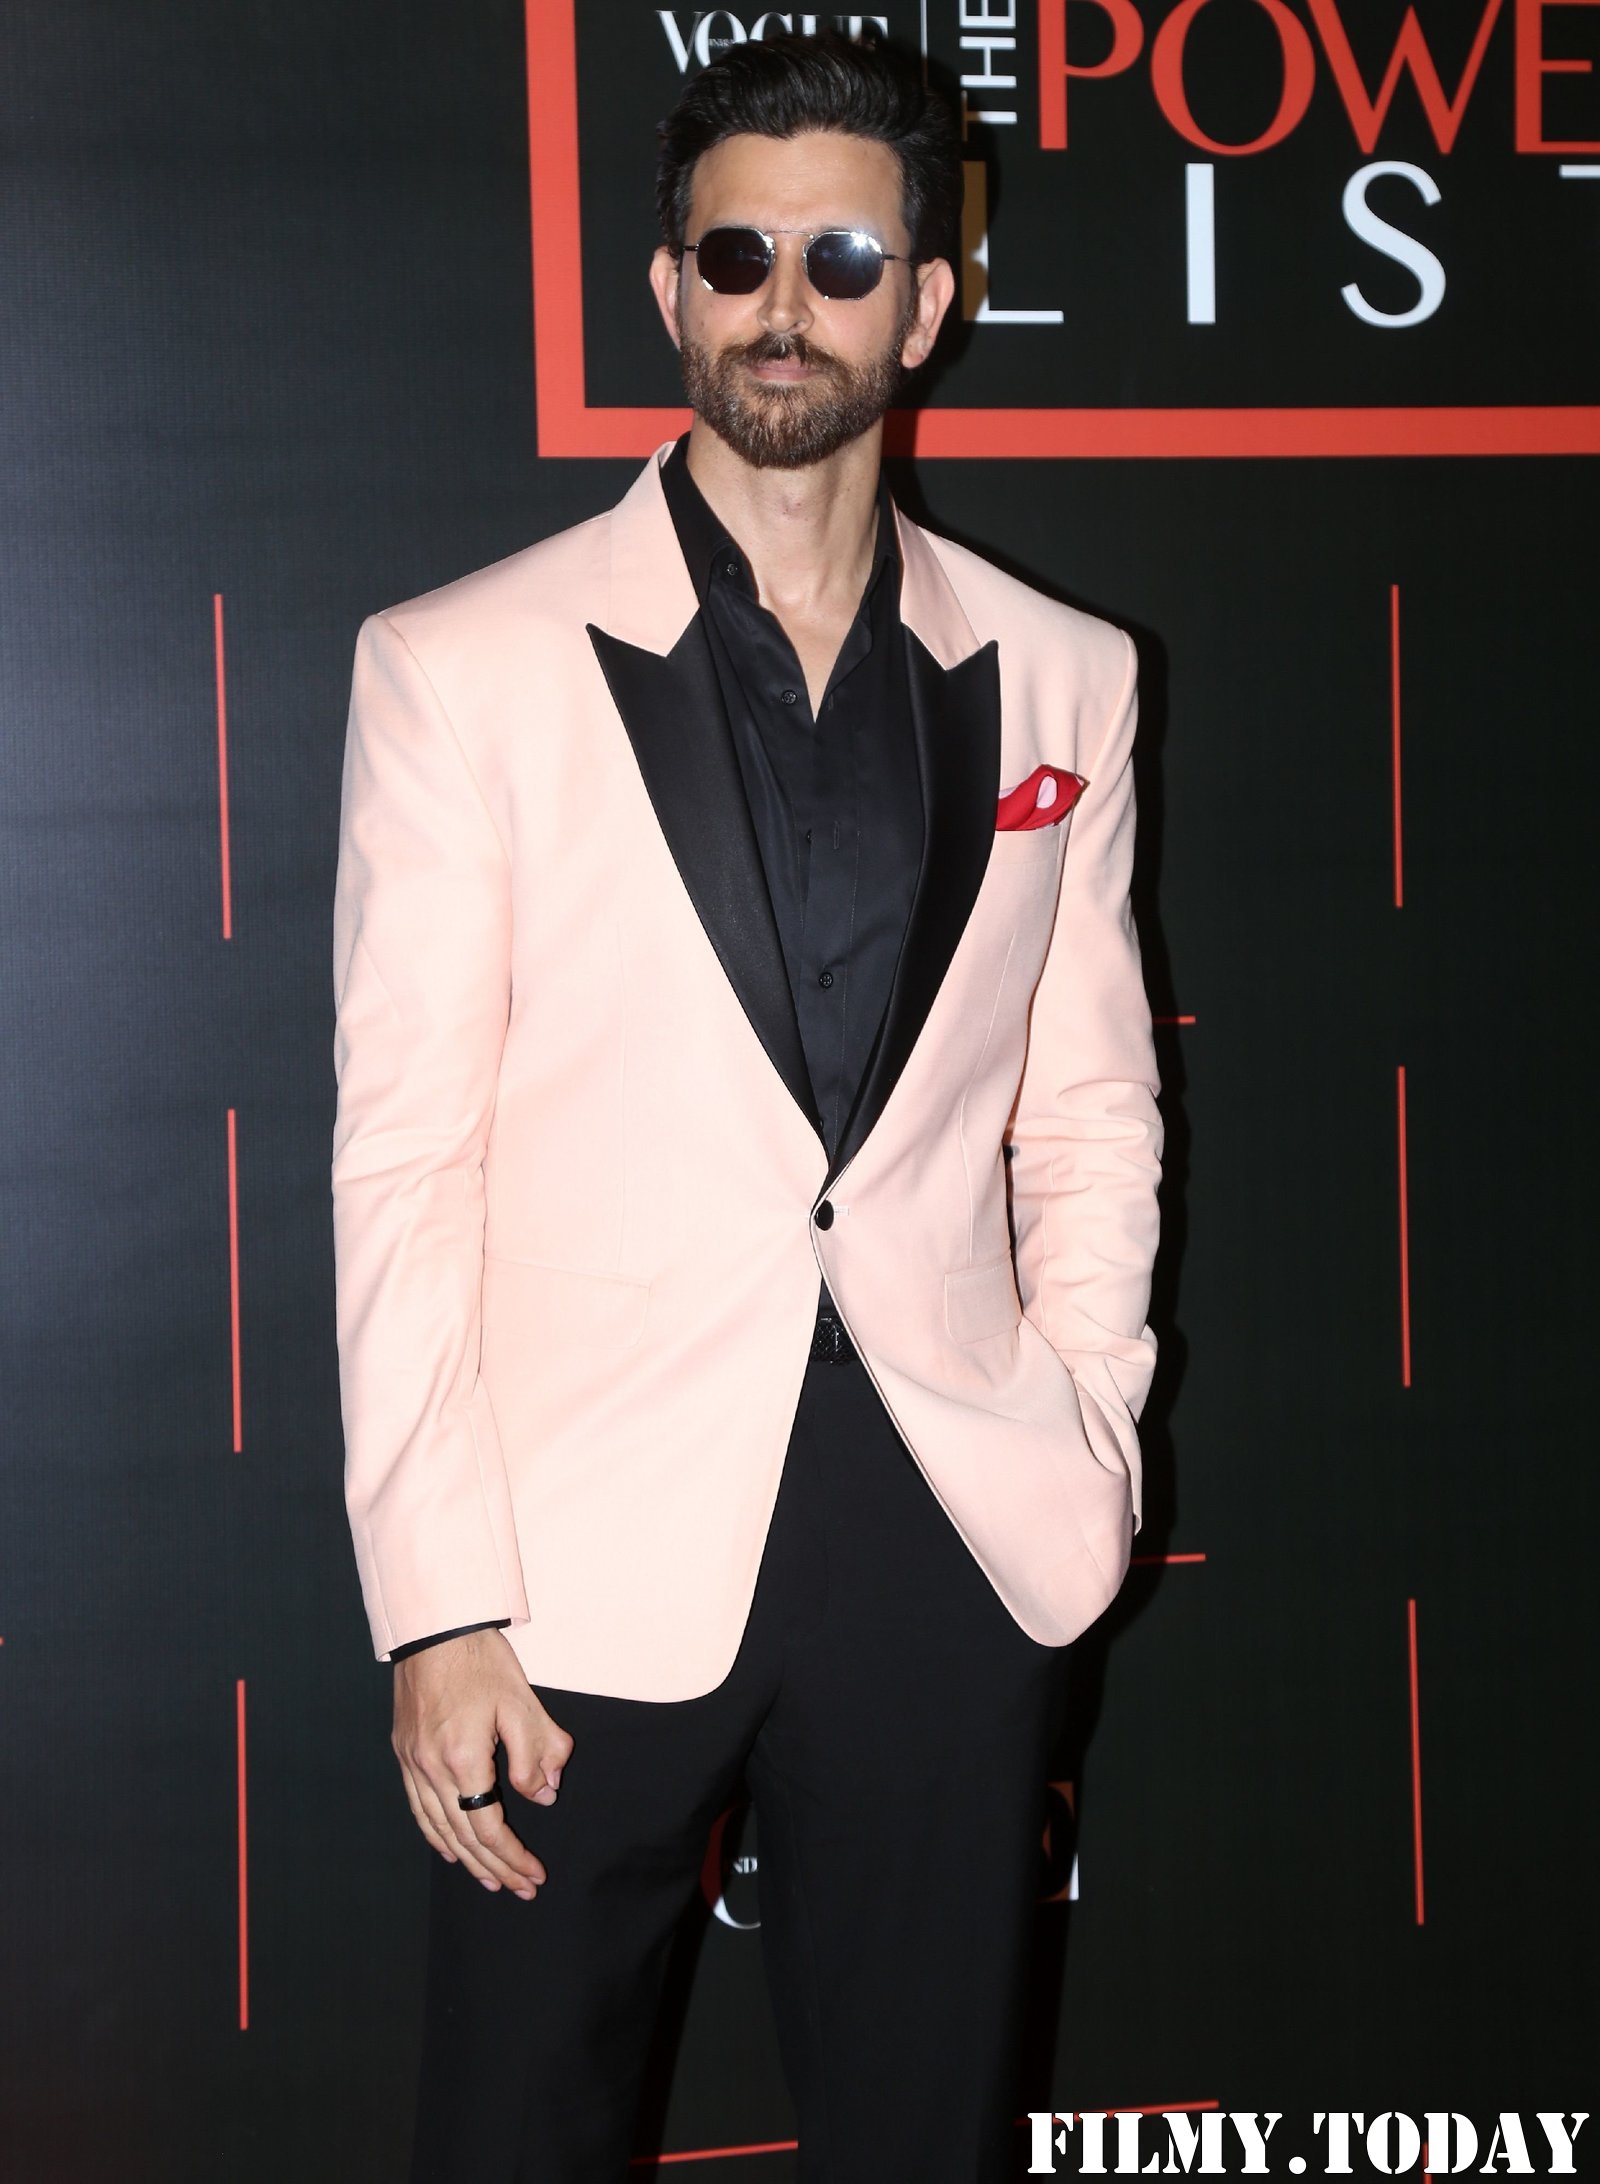 Hrithik Roshan - Photos: Celebs At Vogue The Power List 2019 At St Regis Hotel | Picture 1706340